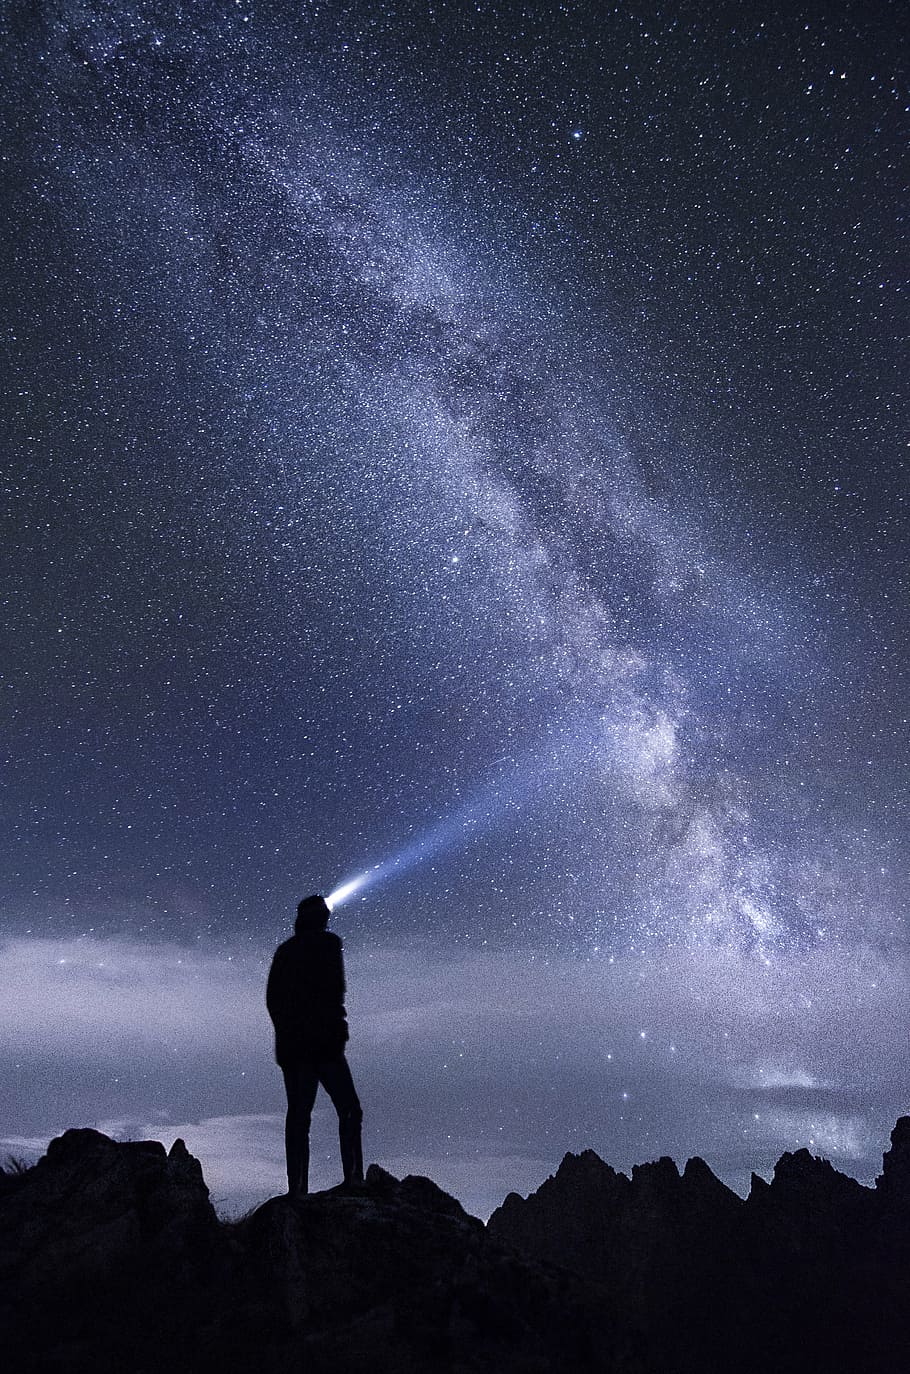 man, standing, rock, night time, silhouette, person, headlights, looking, stars, night